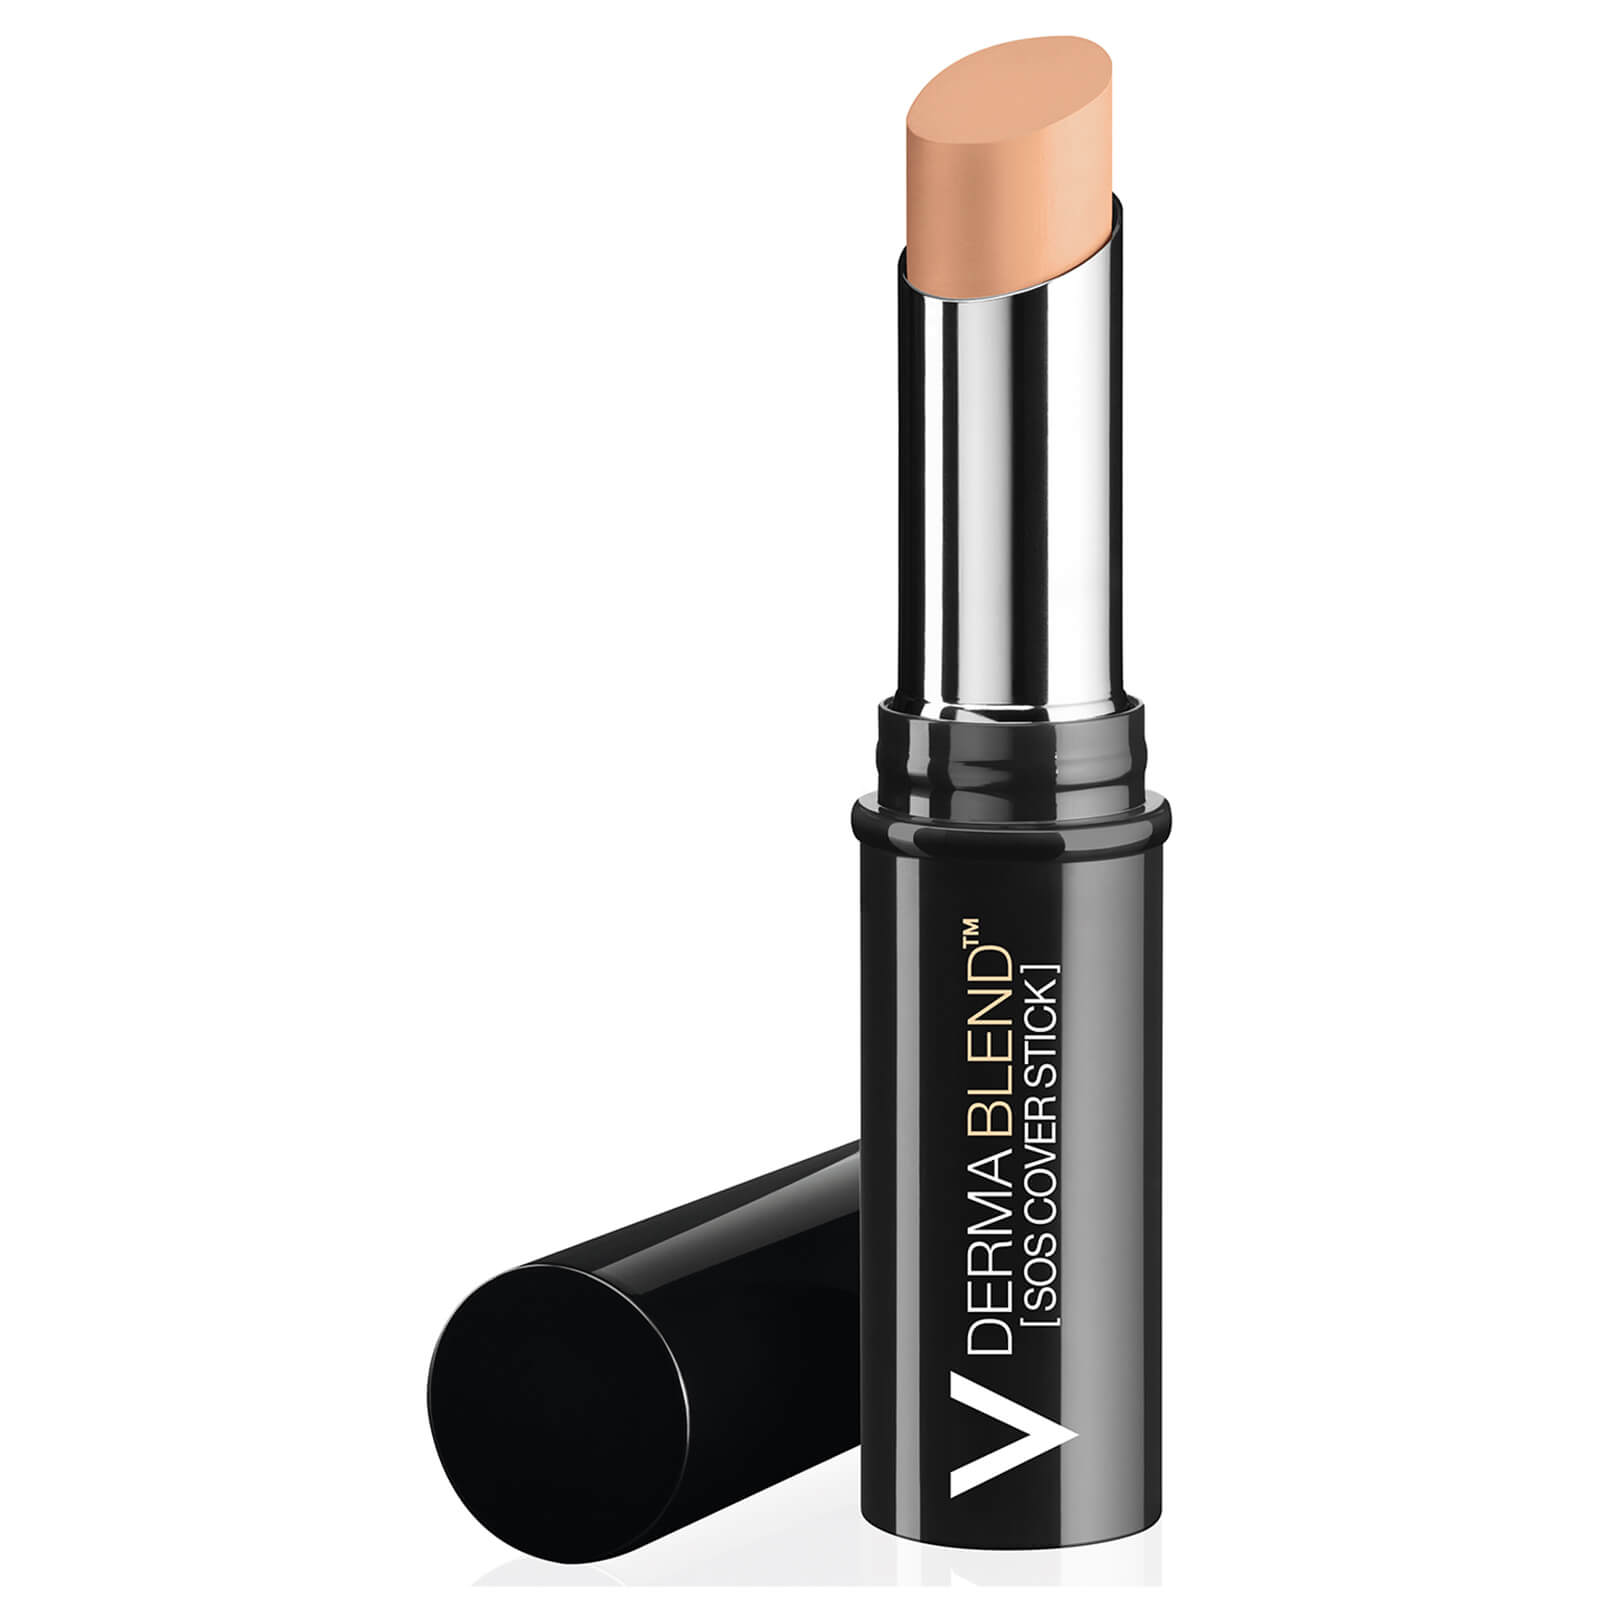 VICHY Dermablend SOS Cover Concealer Stick 4.5g (Various Shades) - 45